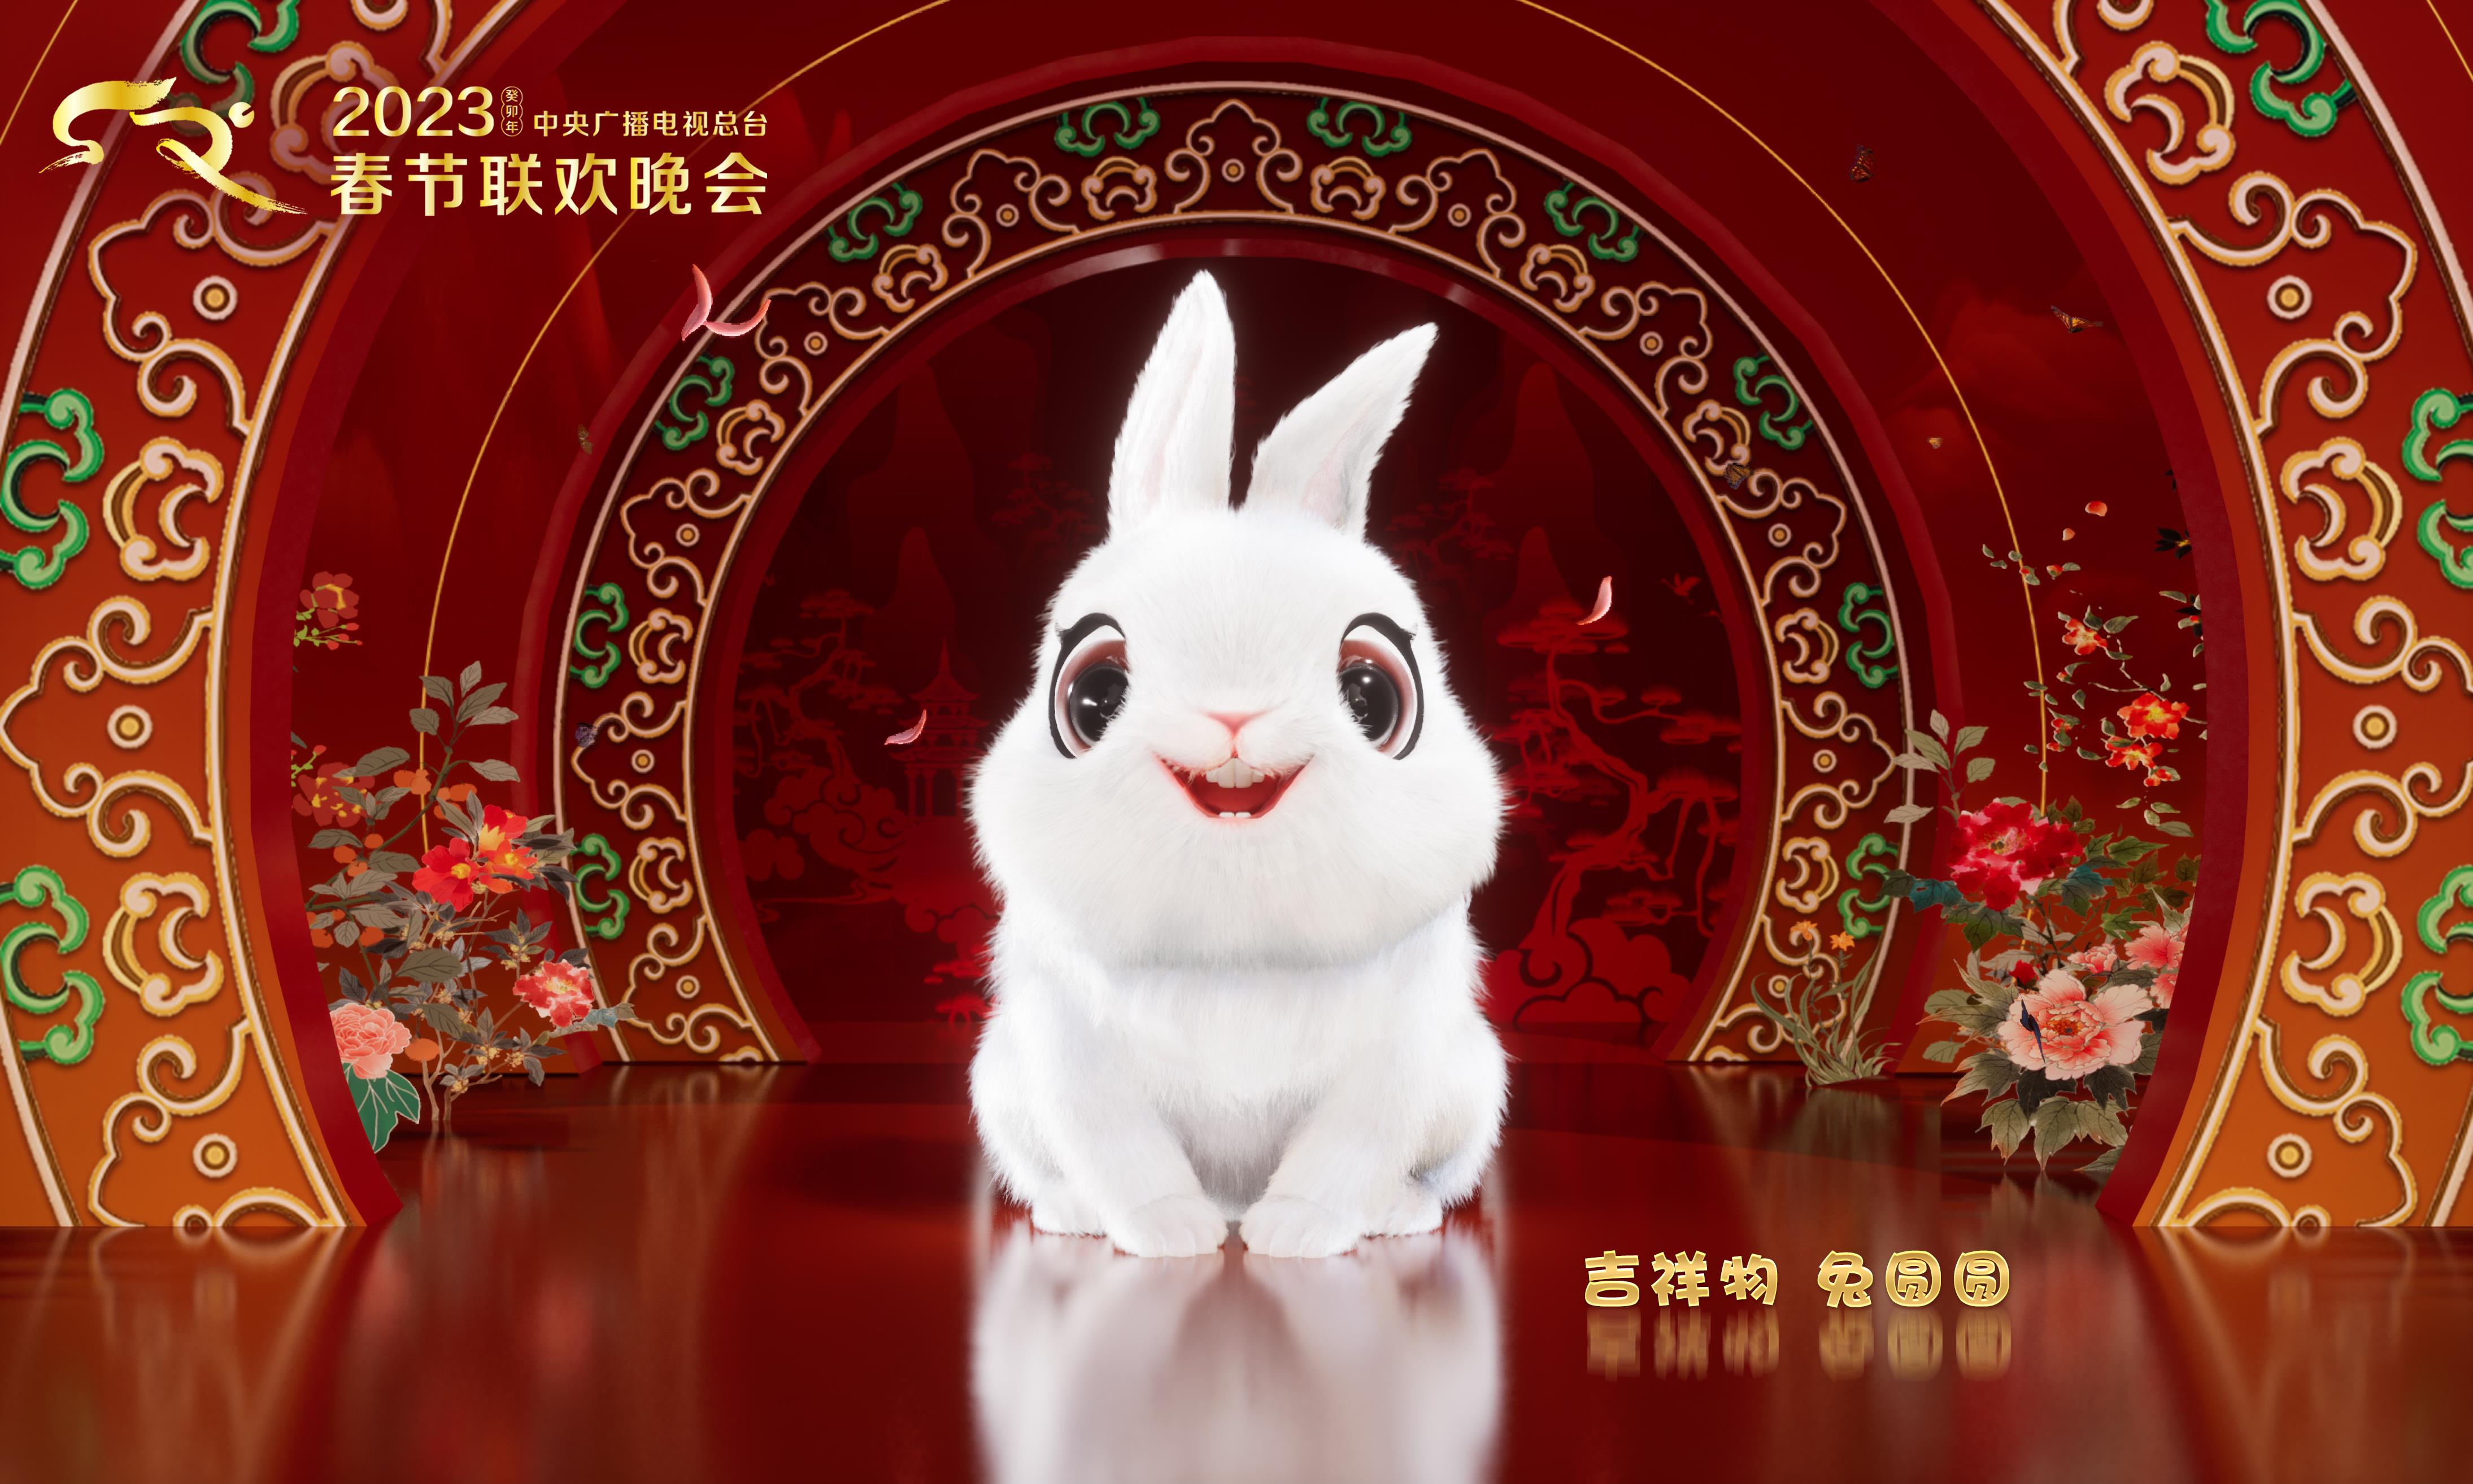 2023 Spring Festival Gala official mascot image 